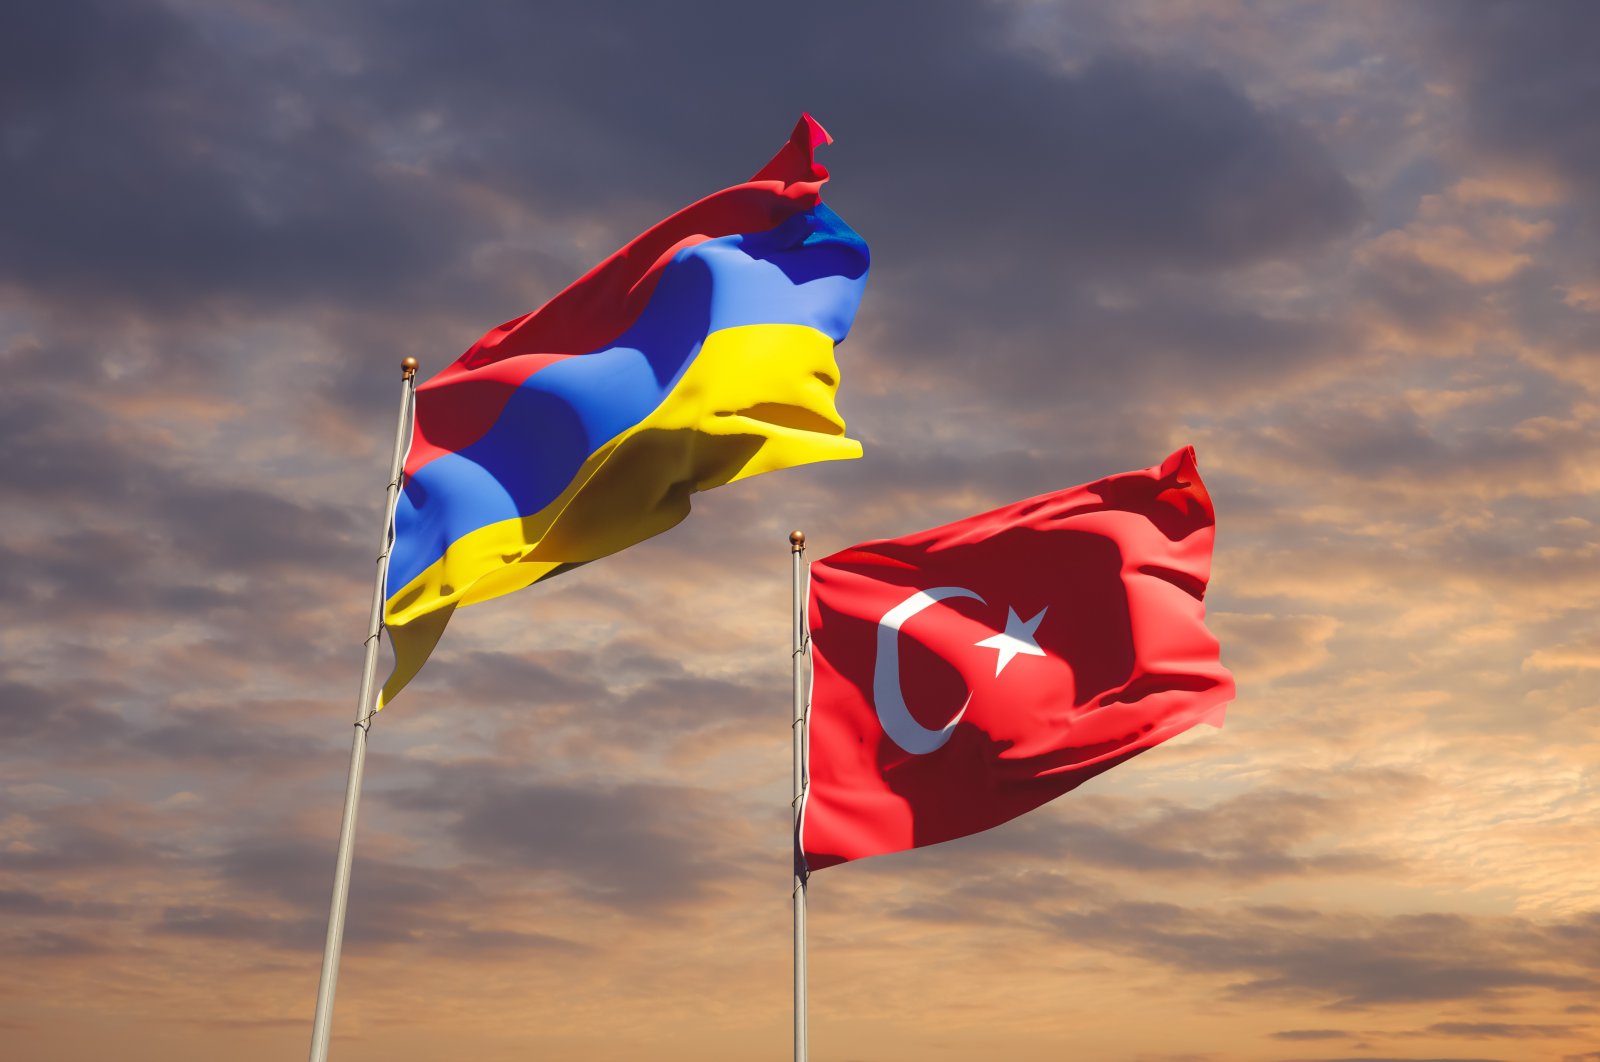 An illustration of Armenian and Turkish flags. (Photo by Shutterstock)